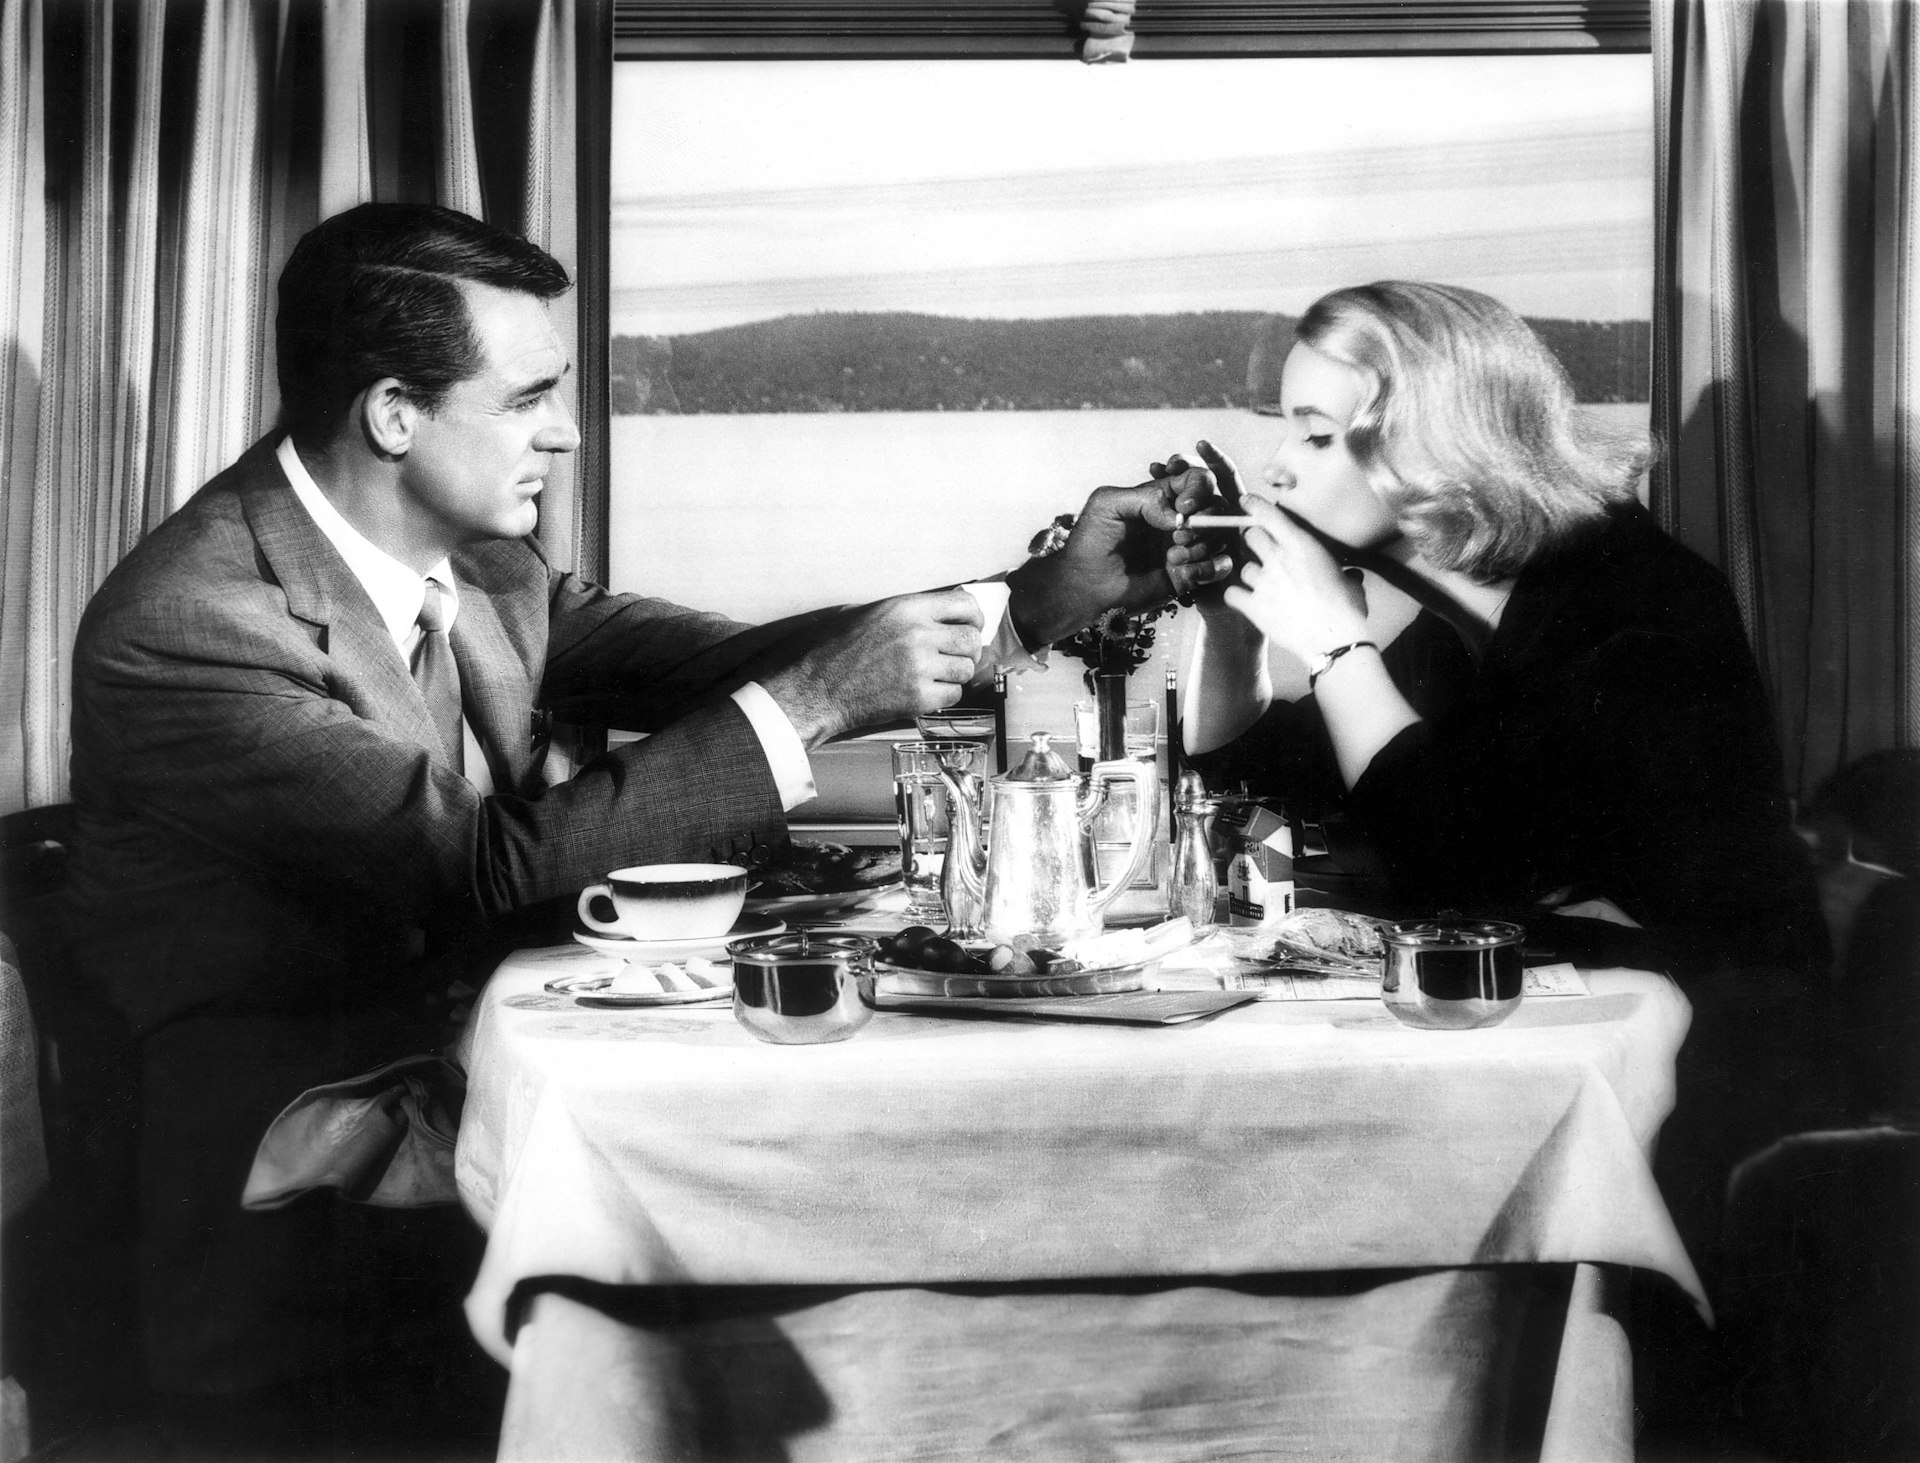 A black and white film still shows Cary Grant in a grey flannel suit lighting a cigarette for Eva Marie Saint in a black dress at the table of a train dining car dressed in white linen with a silver coffee service in Alfred Hitchcock's film 'North by Northwest' 